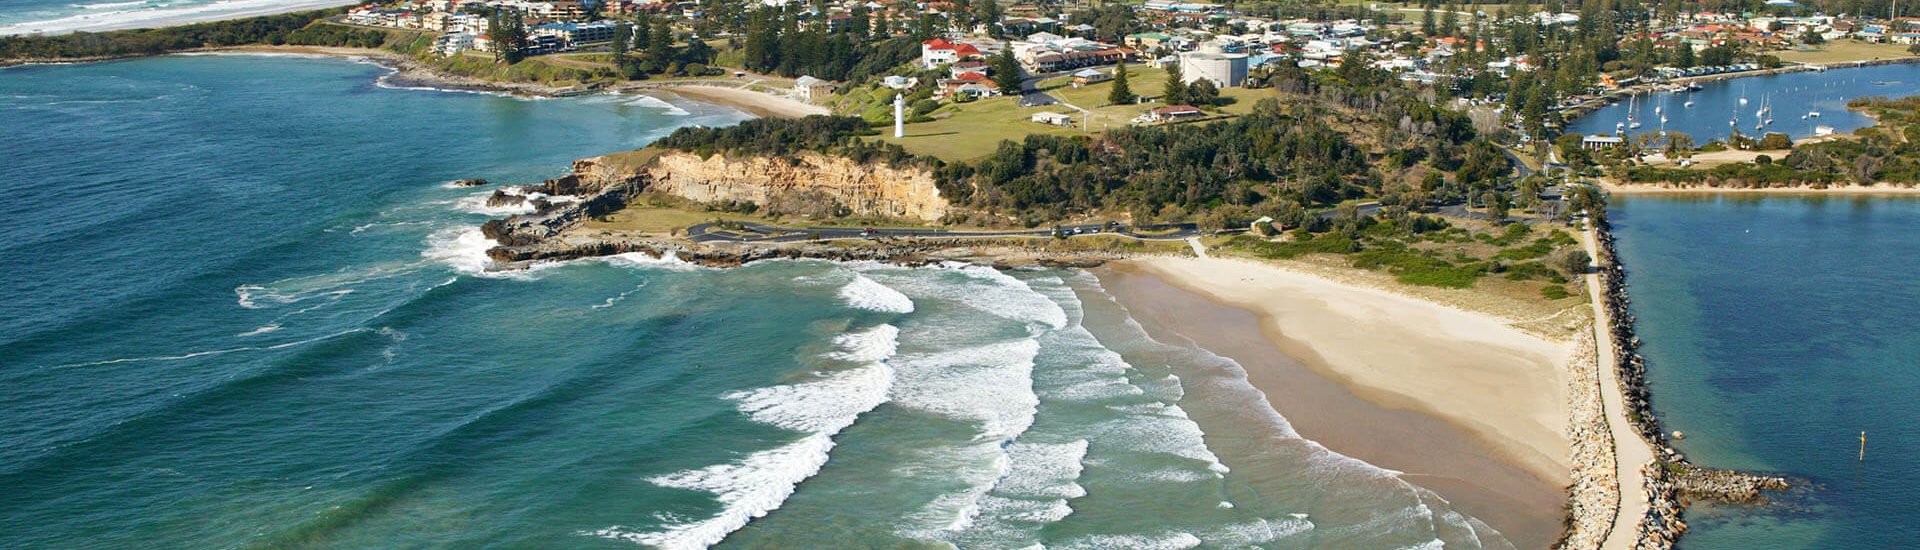 This is an aerial view of Yamba, NSW, Australia